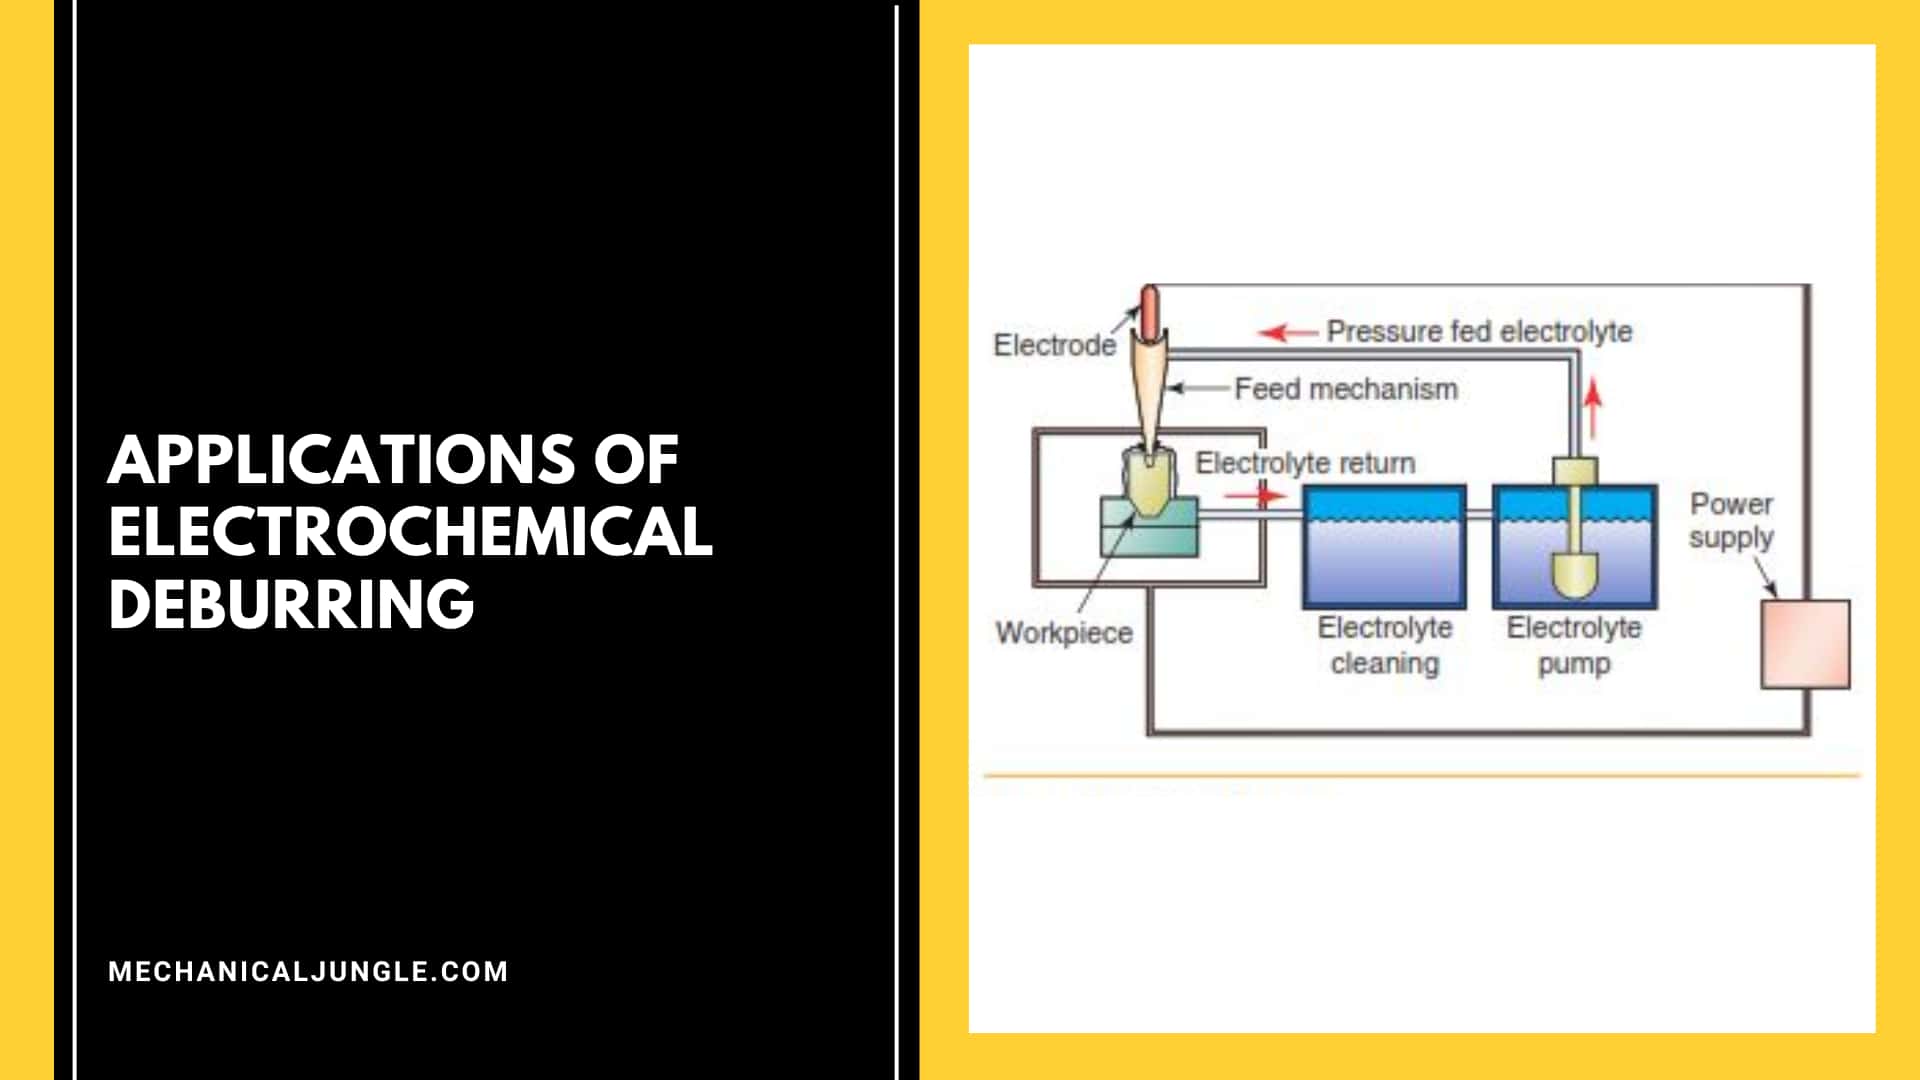 Applications of Electrochemical Deburring